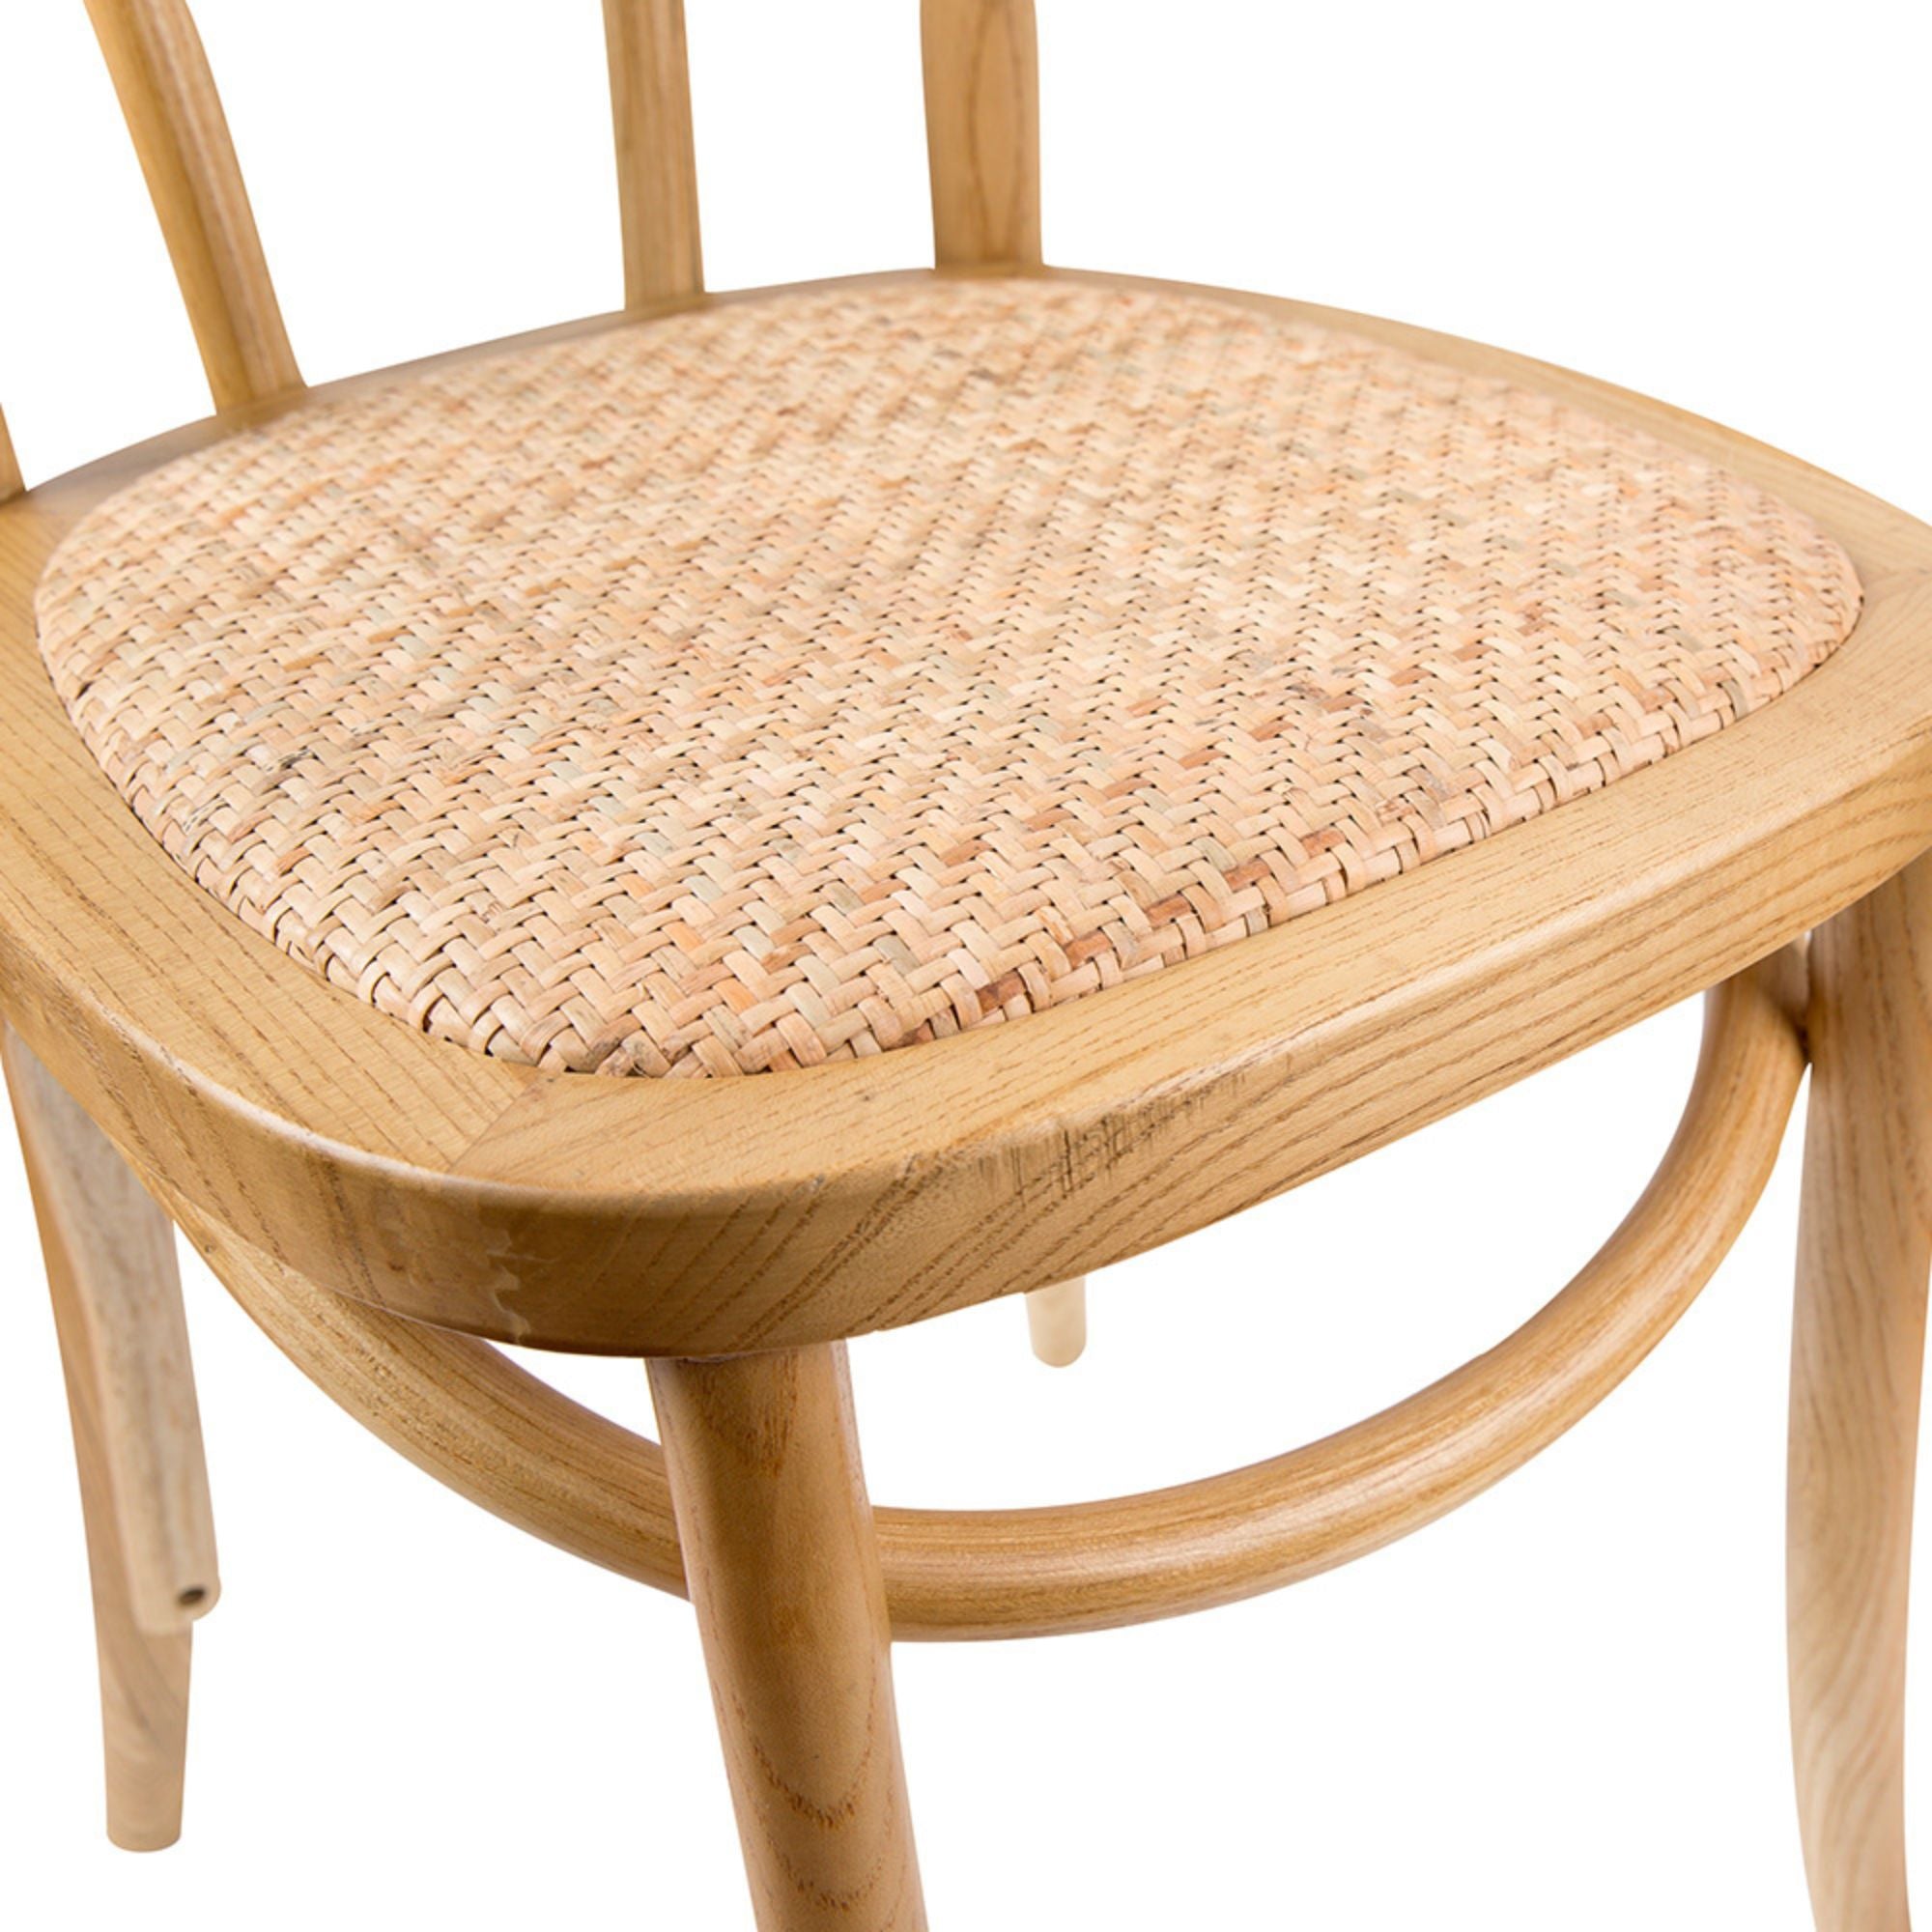 Classic Wooden Dining Chairs: Set of 4/6 with Rattan Seats - Oak Finish